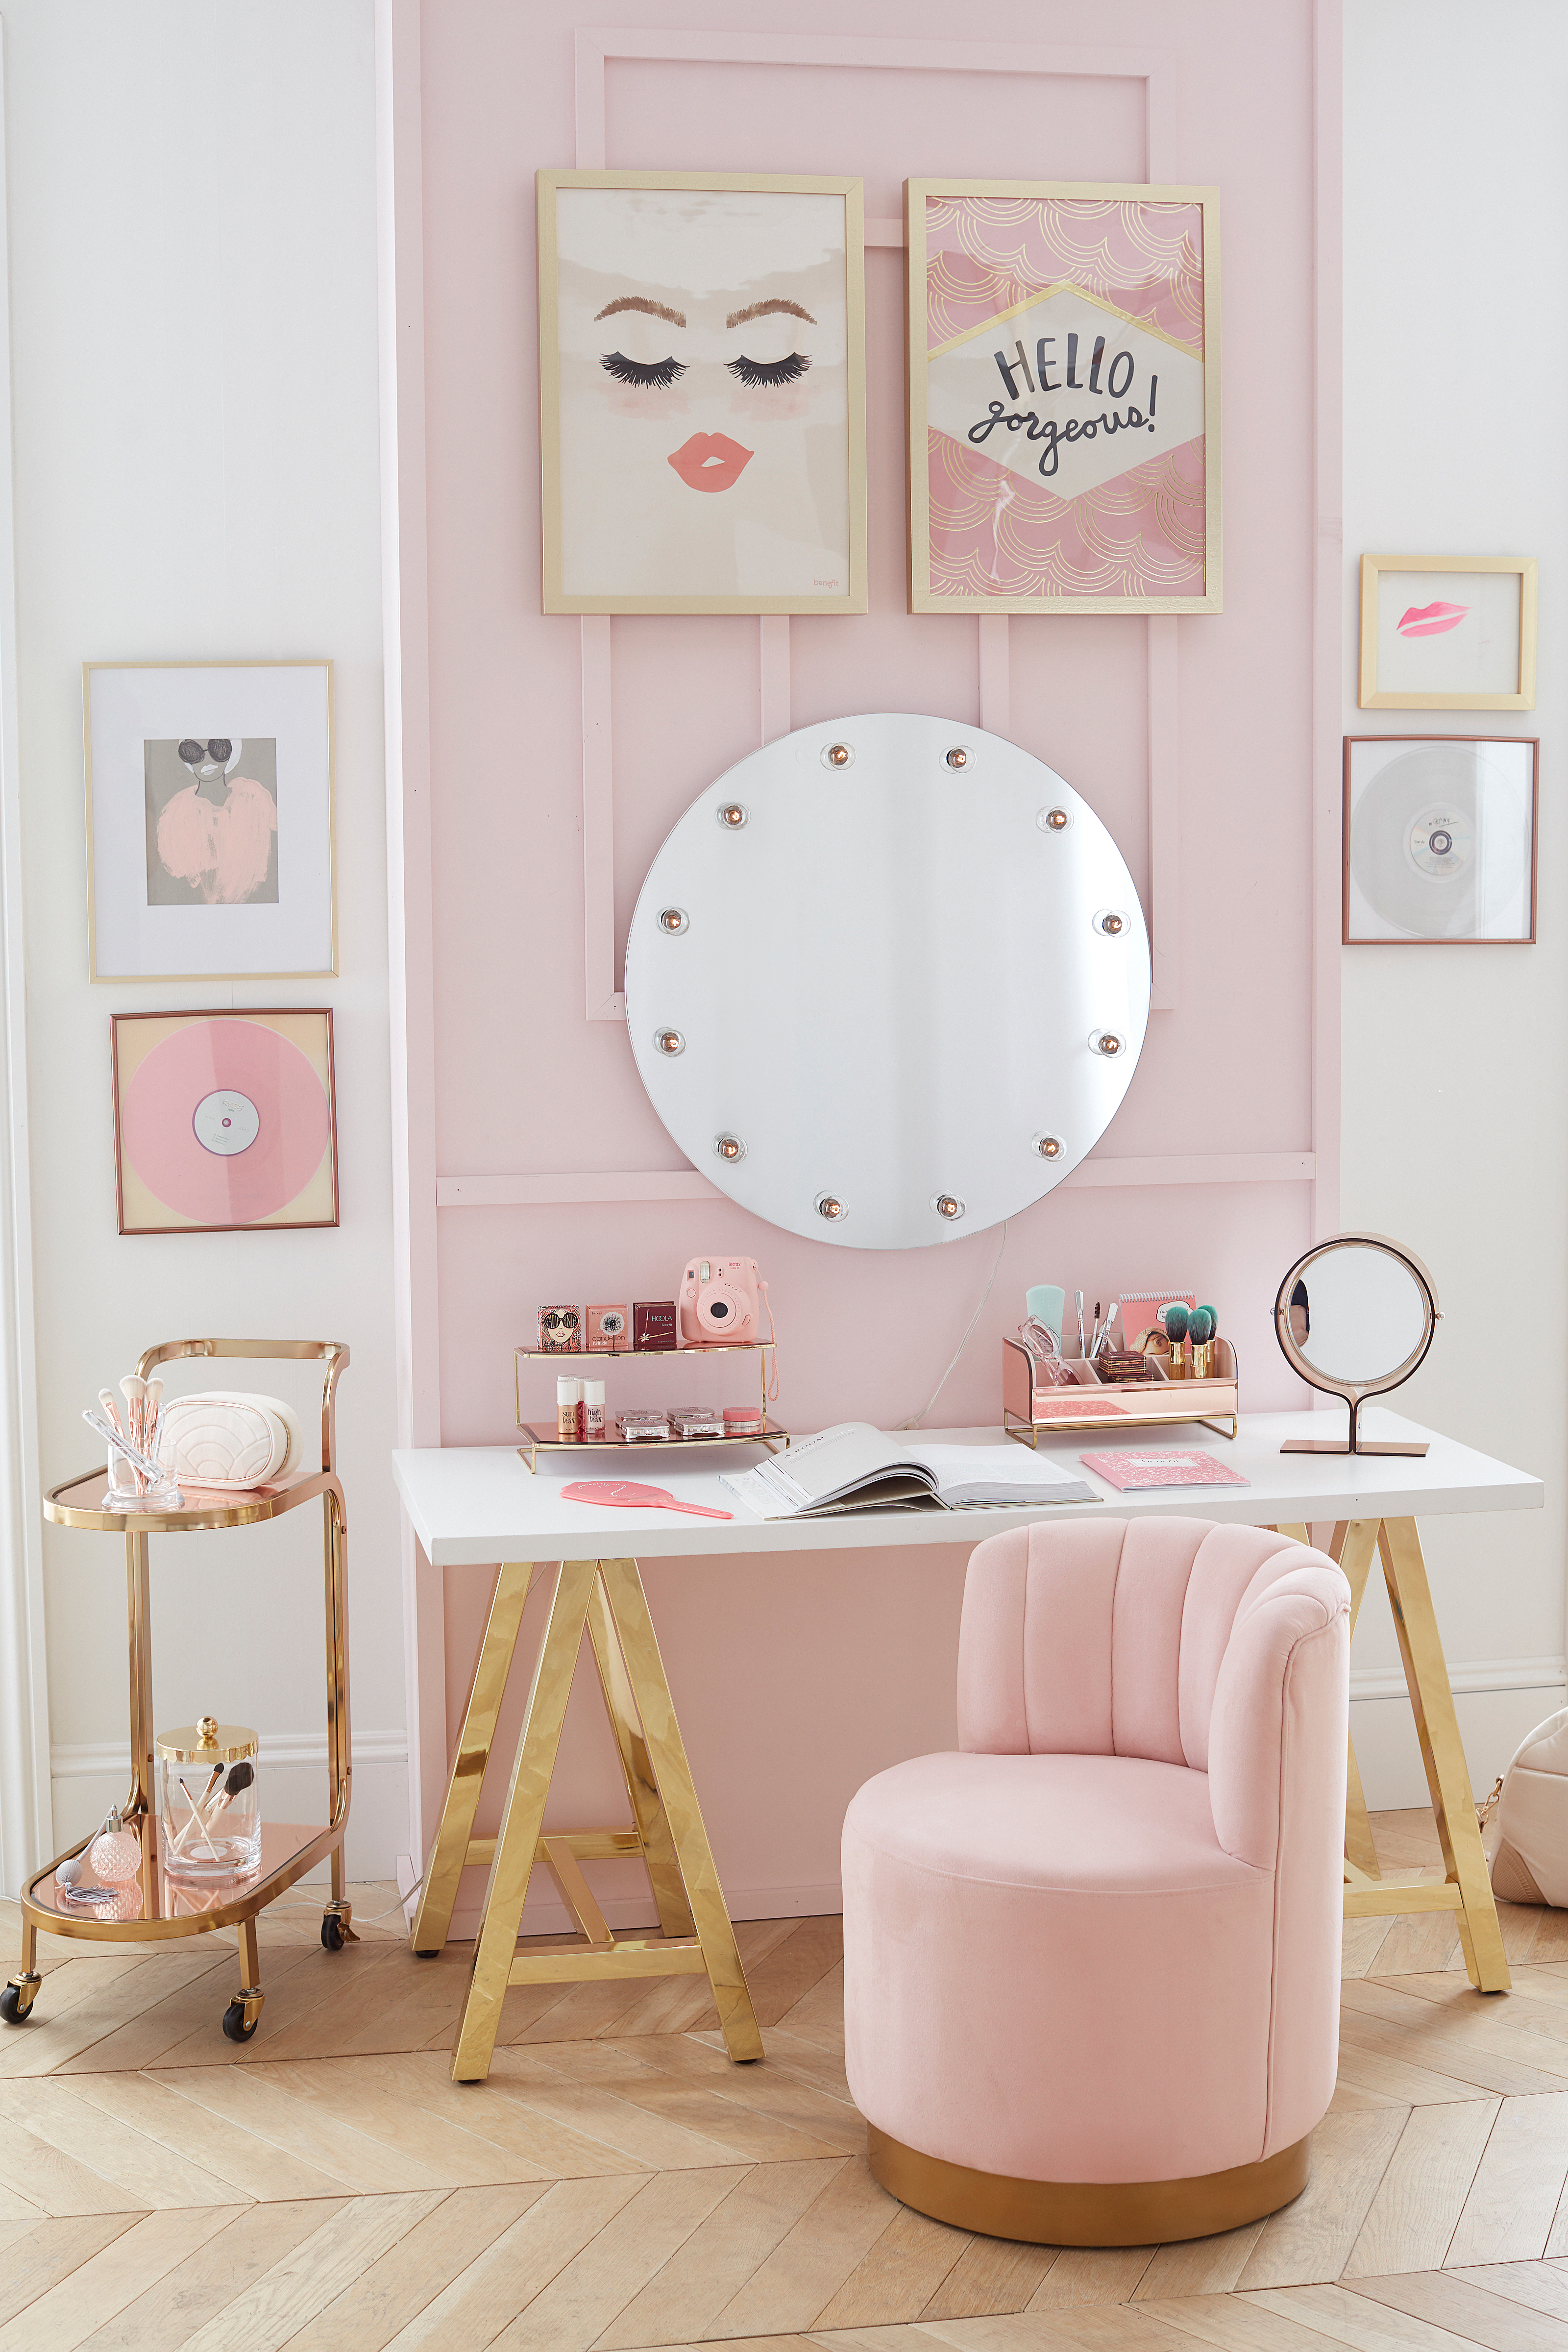 Benefit Cosmetics X Pb Teen Home Decor Collection Details